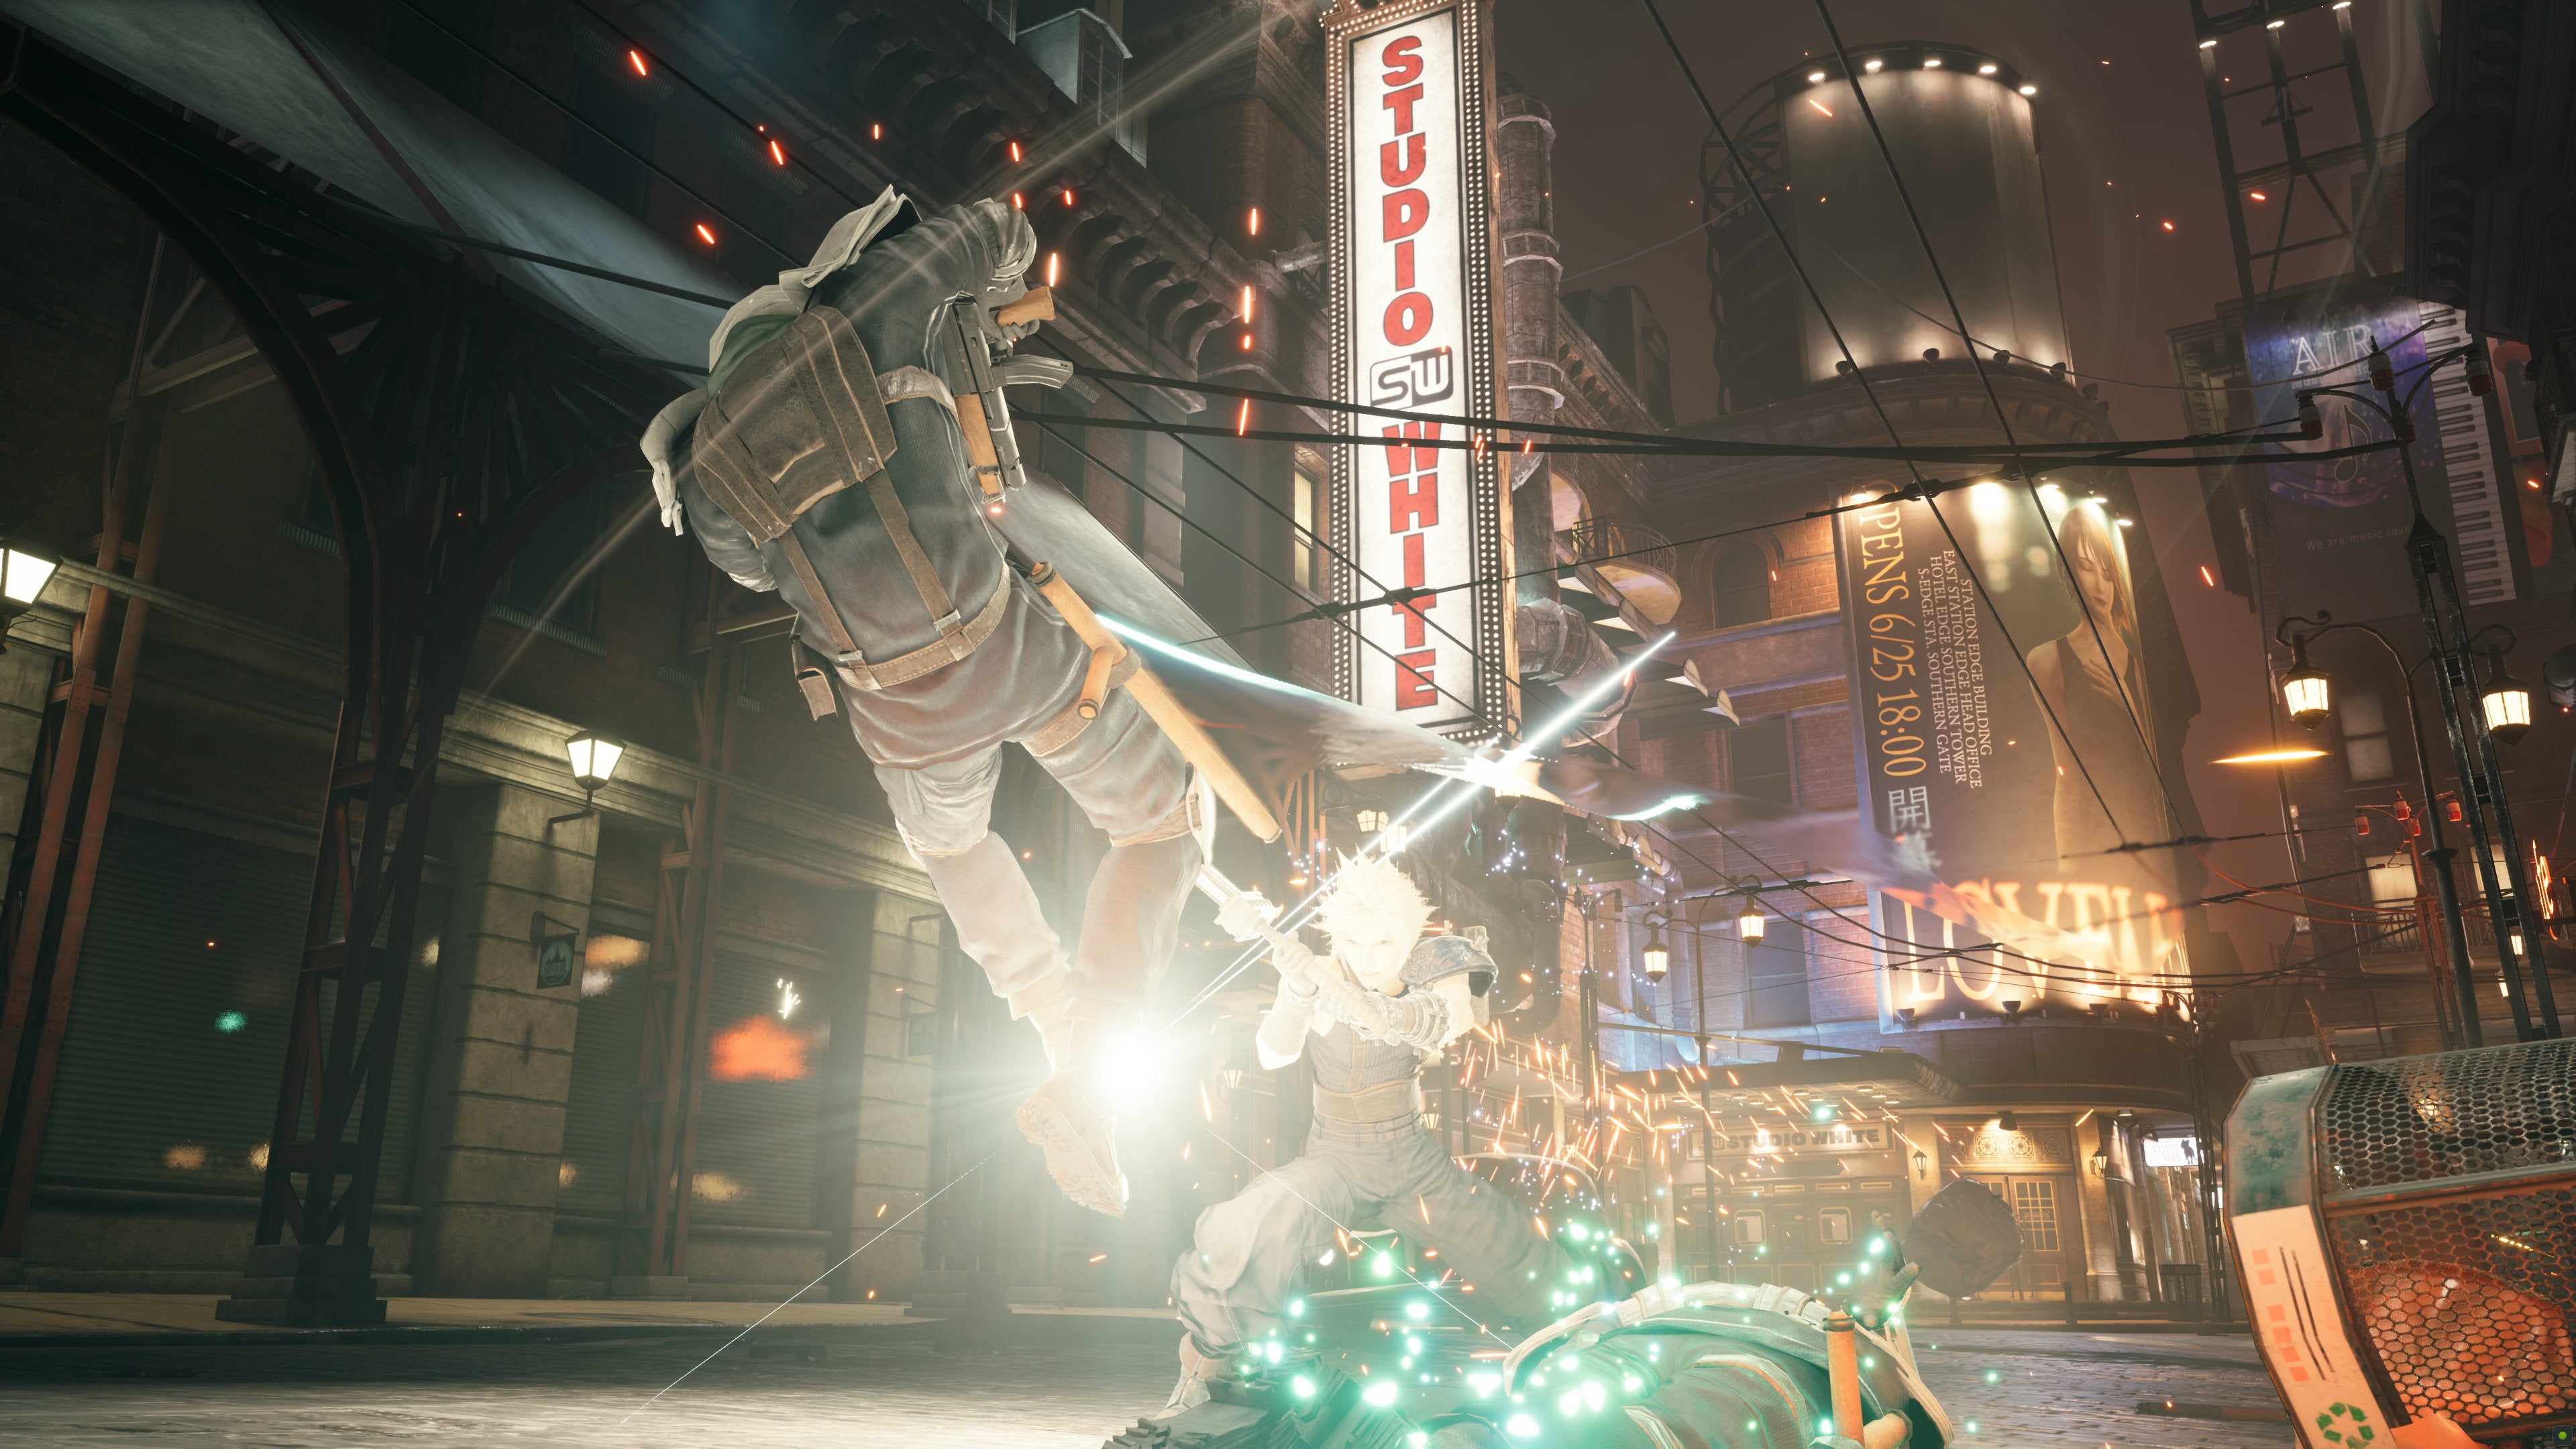 Cloud launches an attack at a Shinra soldier in the streets of Midgar in Final Fantasy VII Remake Intergrade